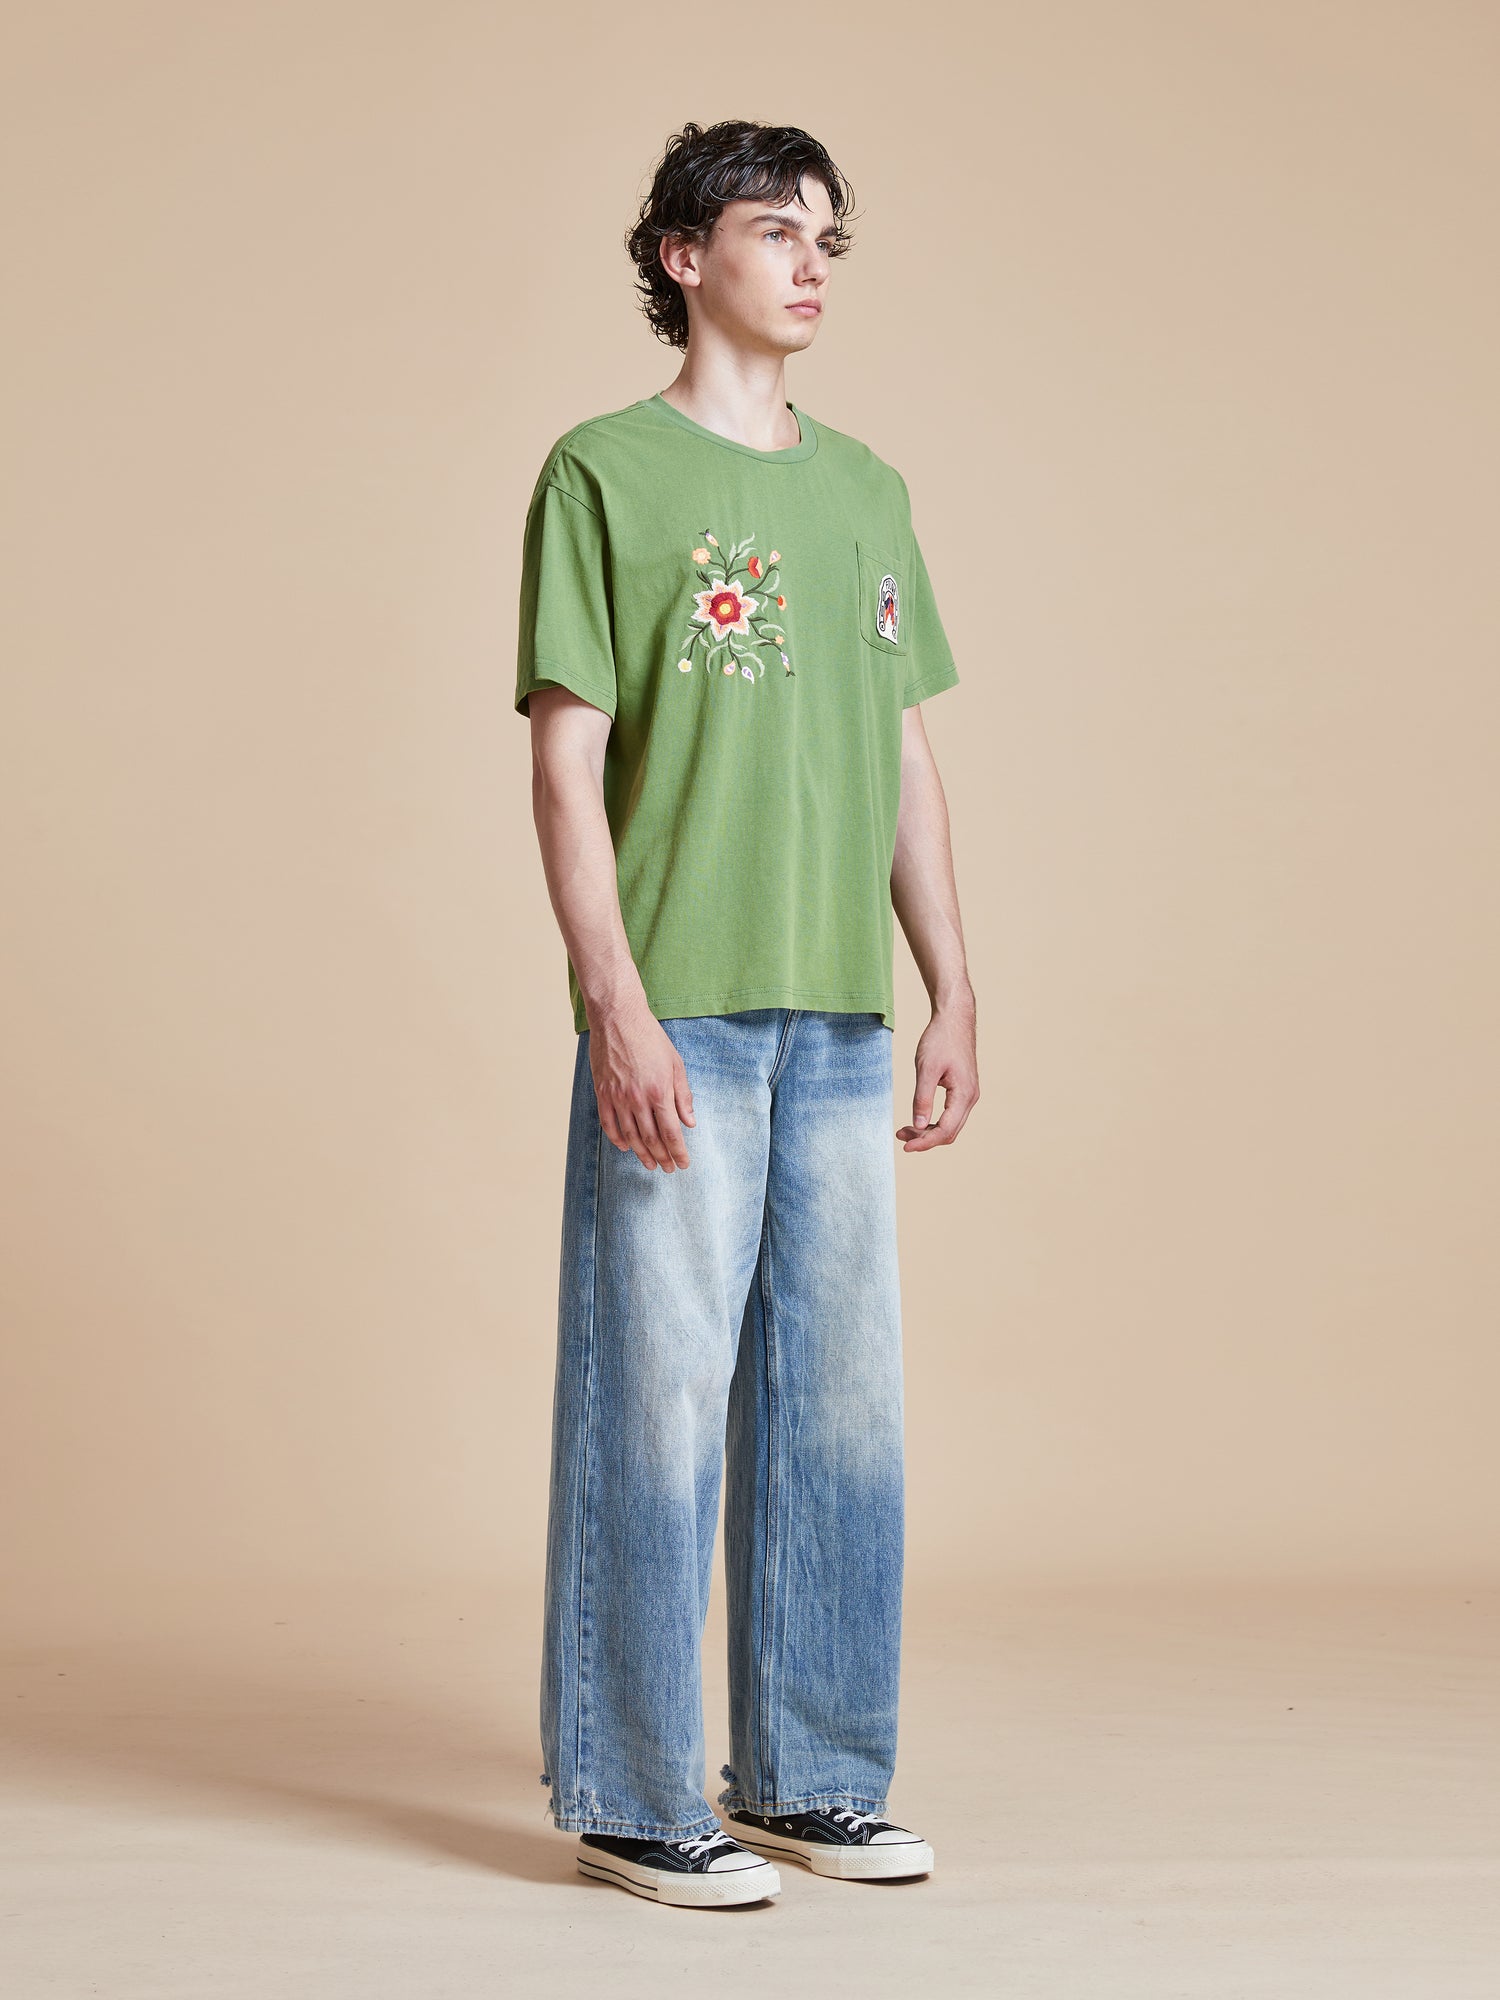 A man wearing a Pine Needle Farm Tee by Found and blue jeans.